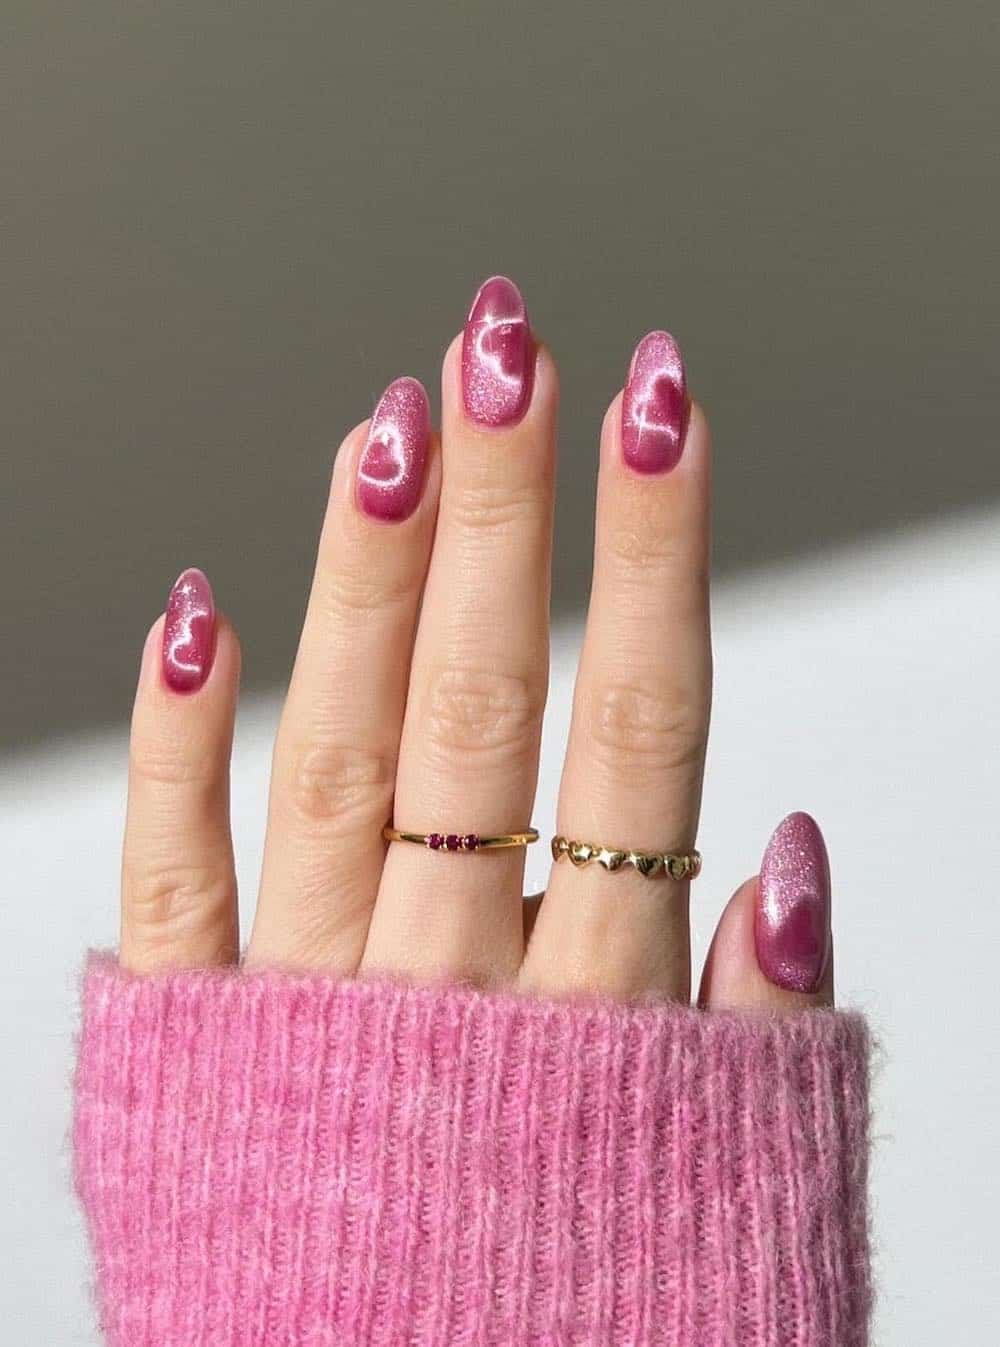 A hand with medium almond nails painted with shimmering pink velvet polish with heart outlines